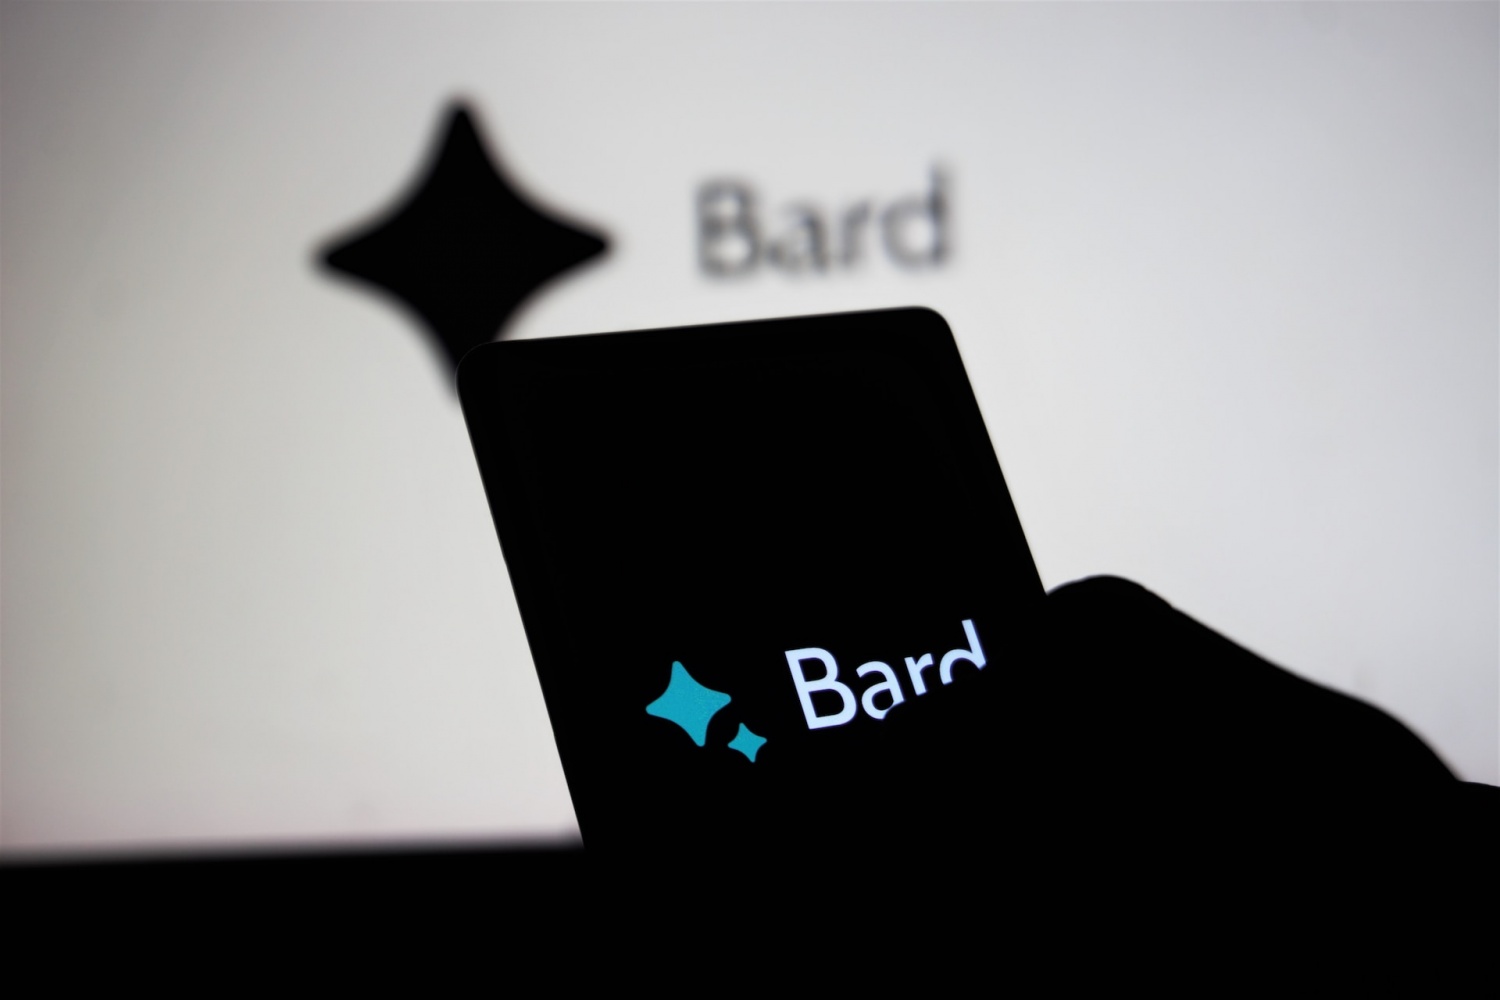 Google Assistant With Bard: Generative AI Upgrade Coming to Android, iOS